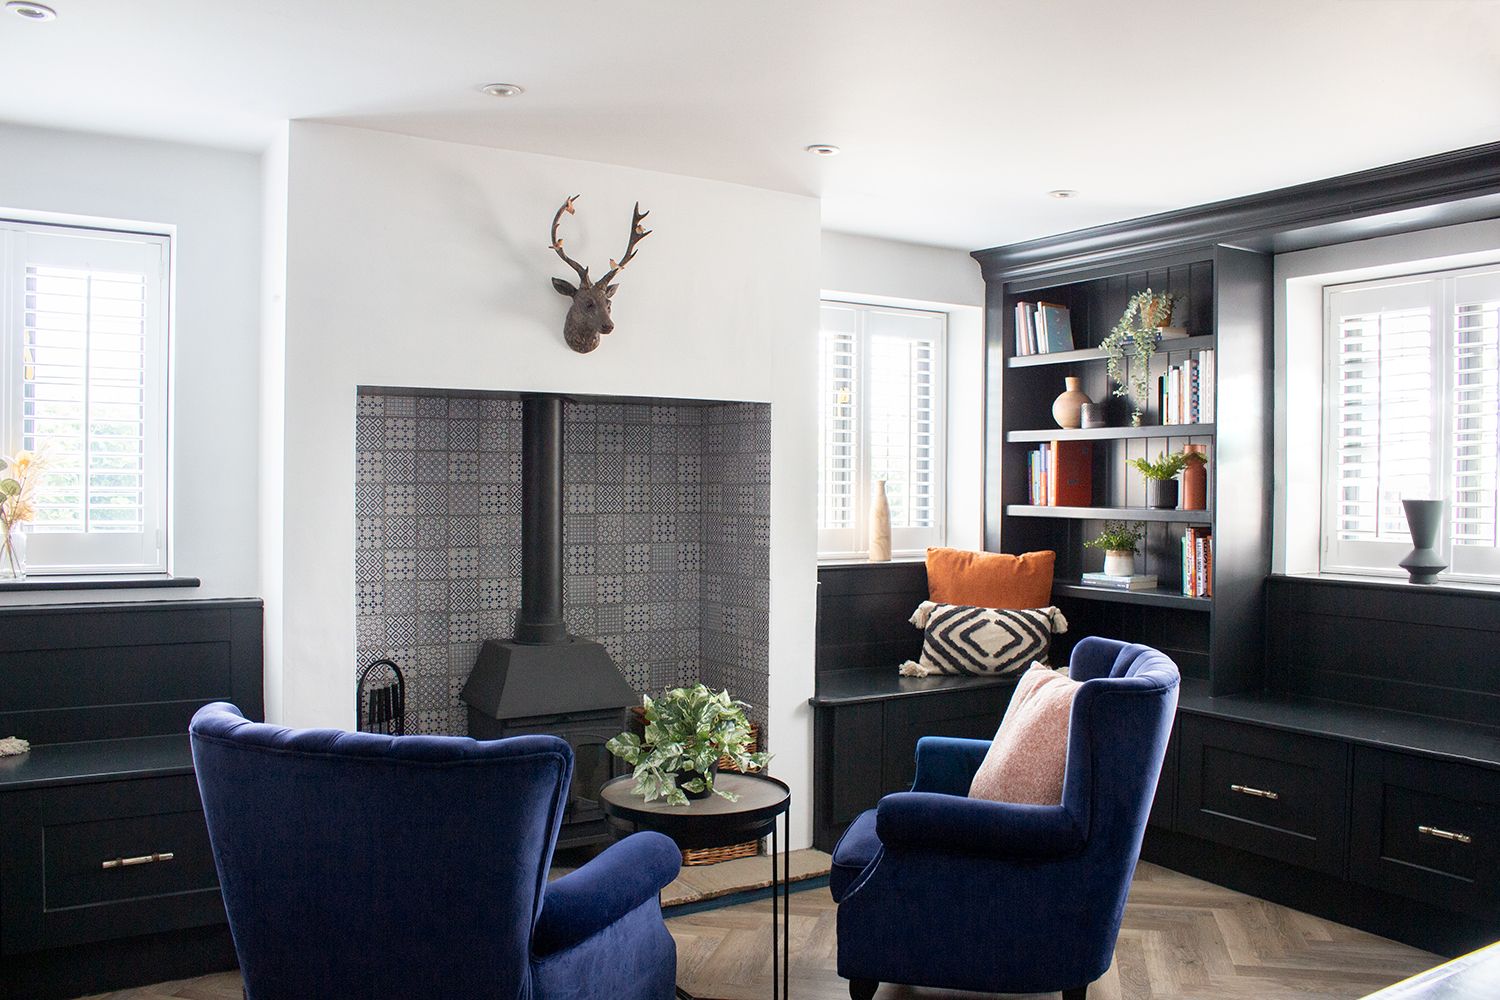 A photo of the snug, with built in shelving and window seats, and blue velvet chairs by the fire.